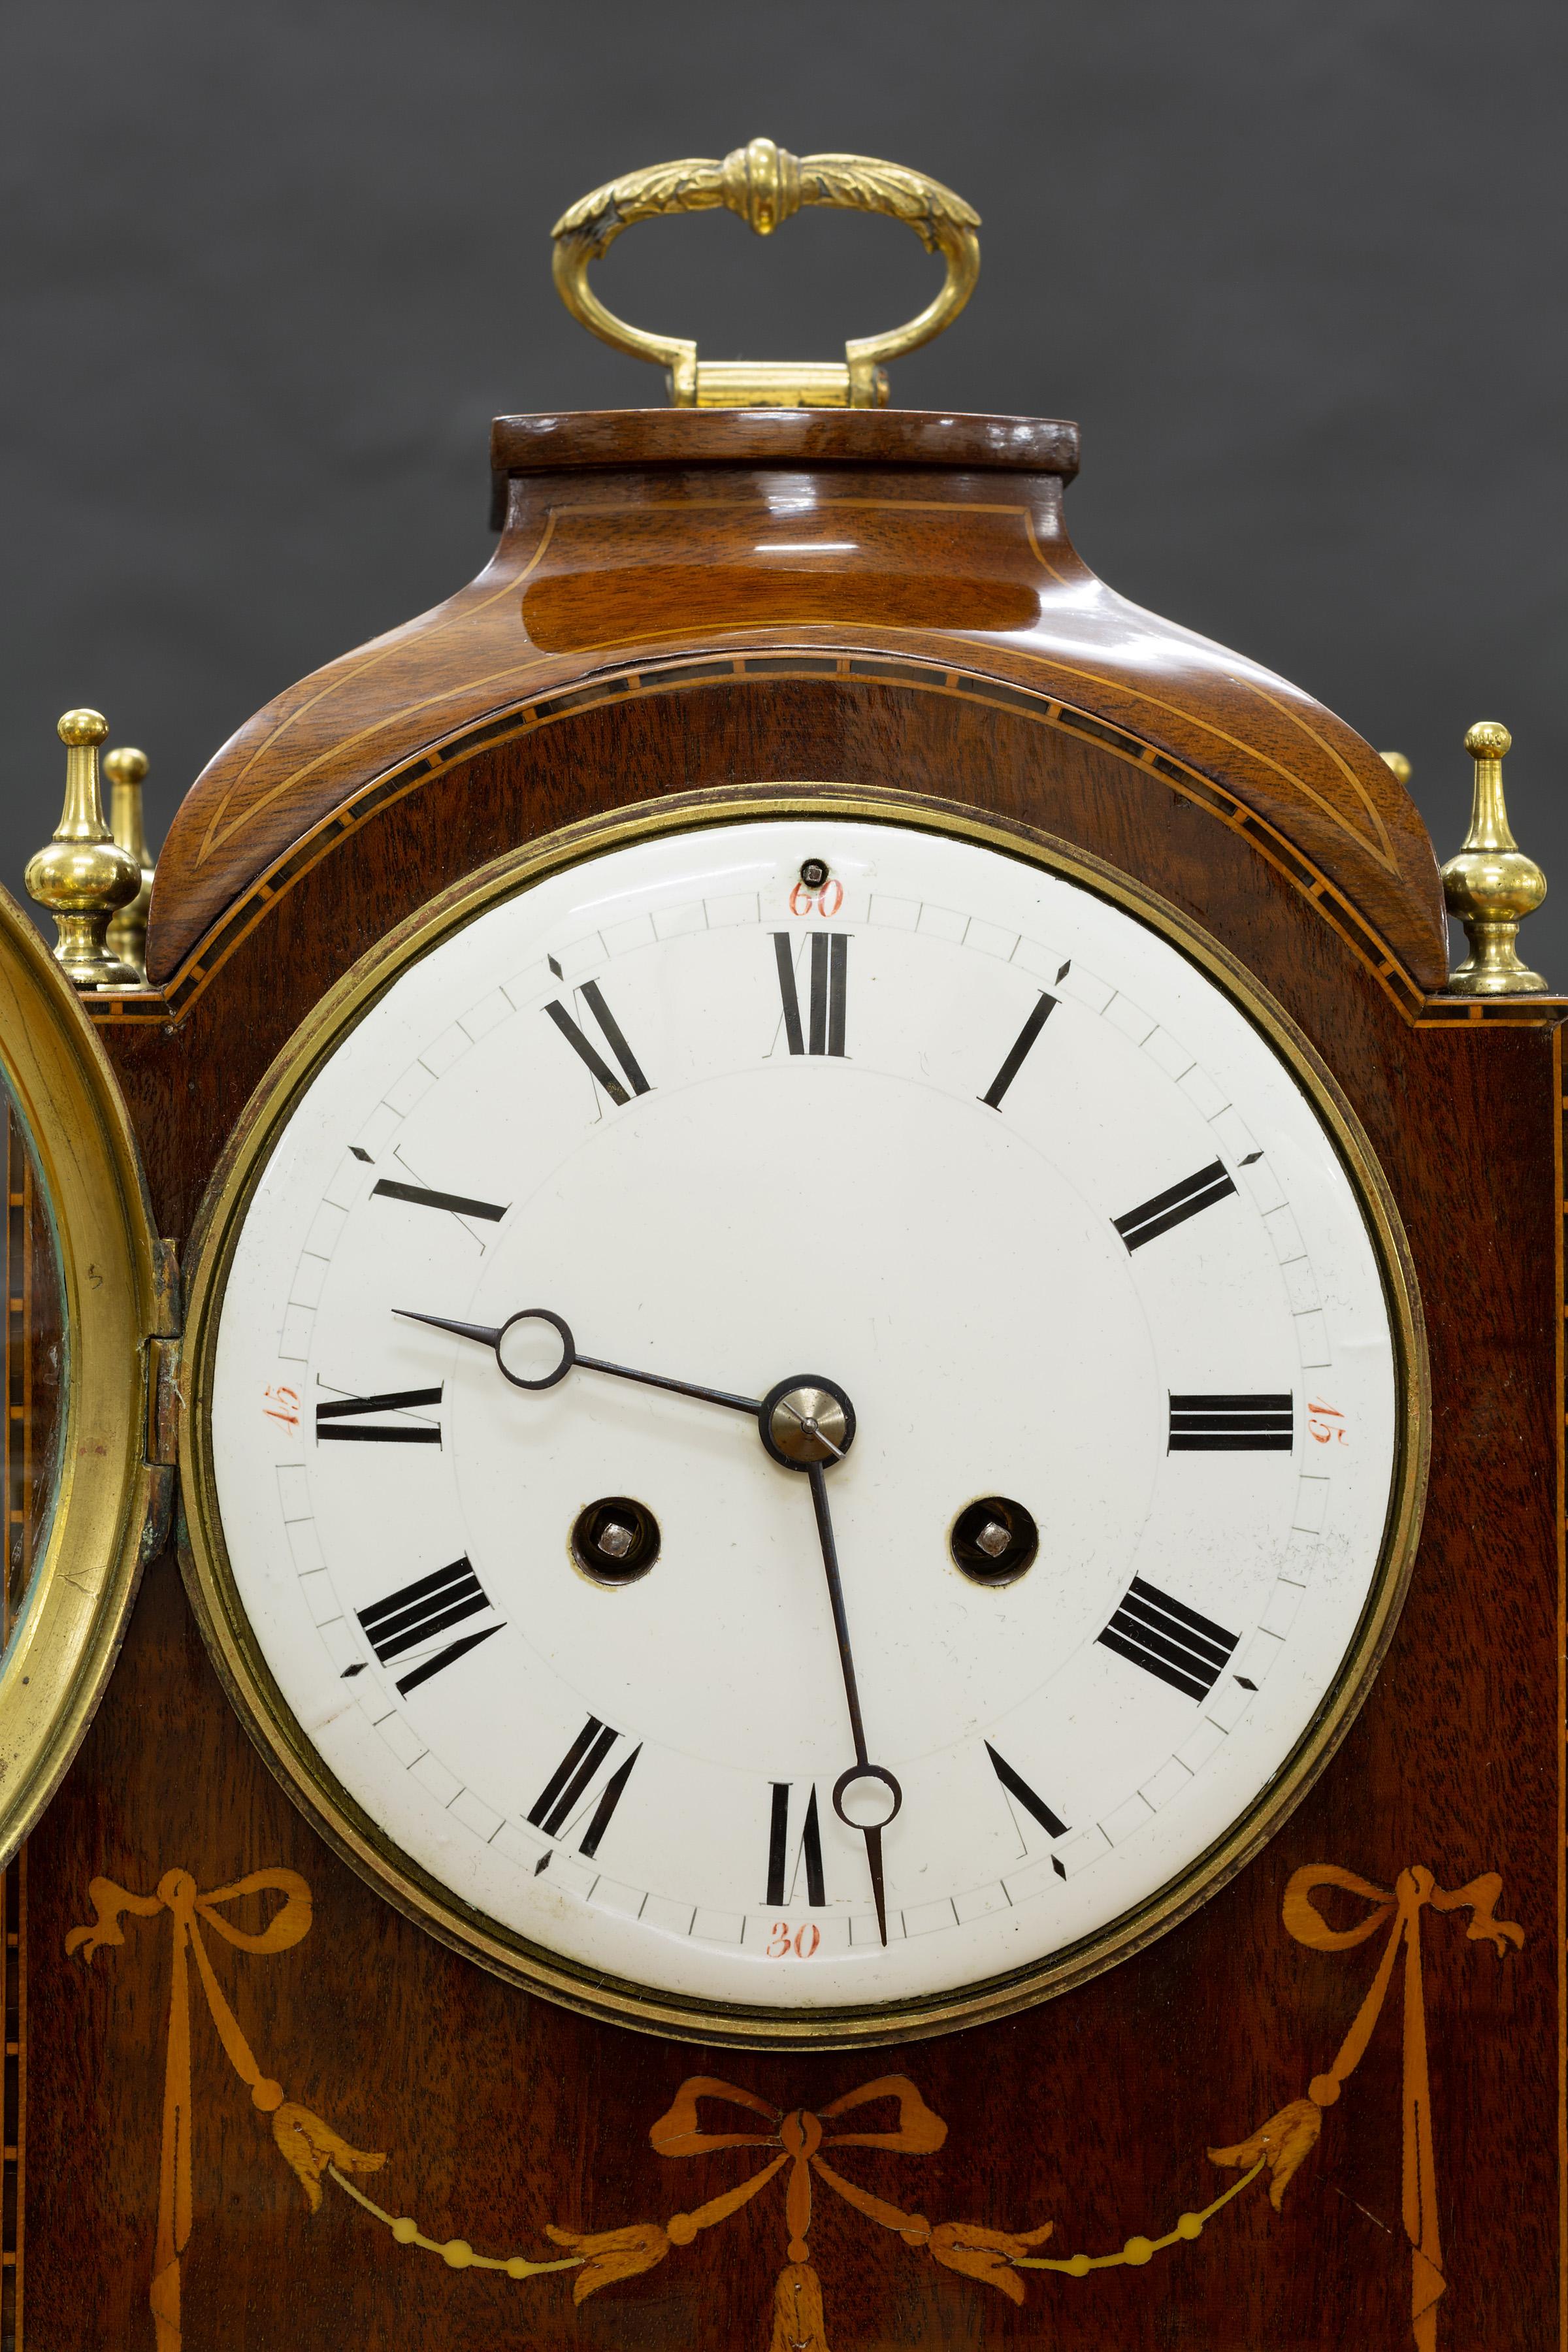 Edwardian mahogany mantel clock standing on brass bracket feet in an arch top case surmounted by four finials with satinwood swag decoration.

Enamel dial with Roman numerals and original ‘blued’ steel hands.

Eight day French movement striking